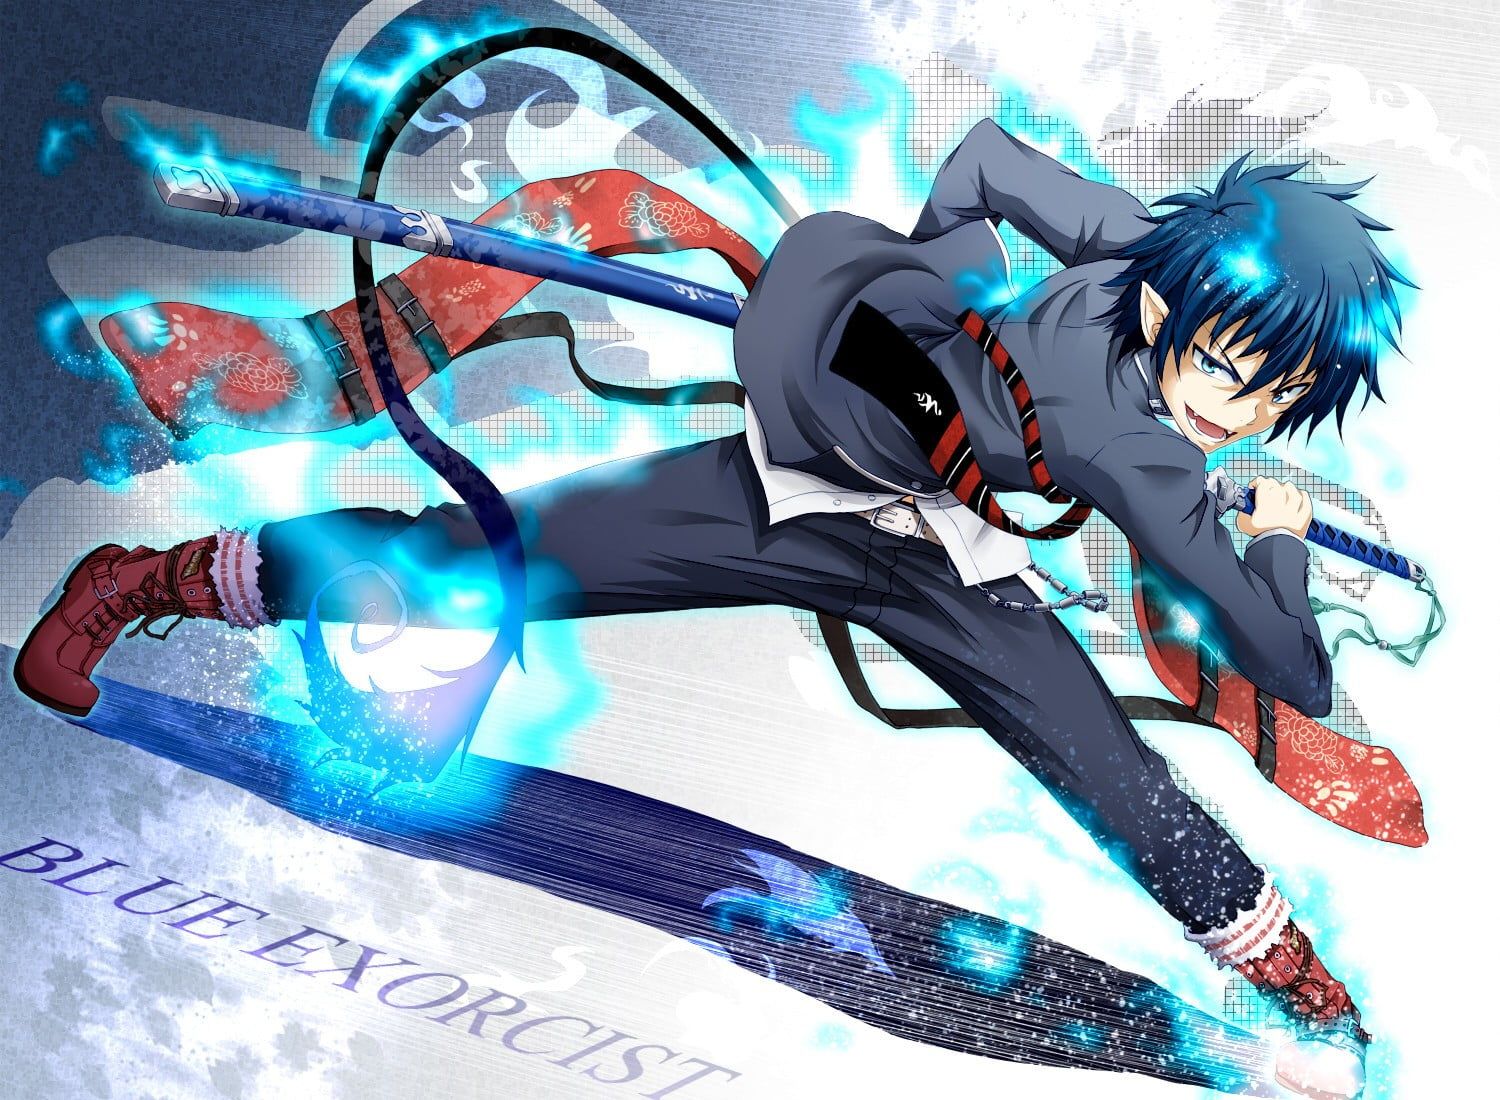 6. Blue Exorcist - wide 6